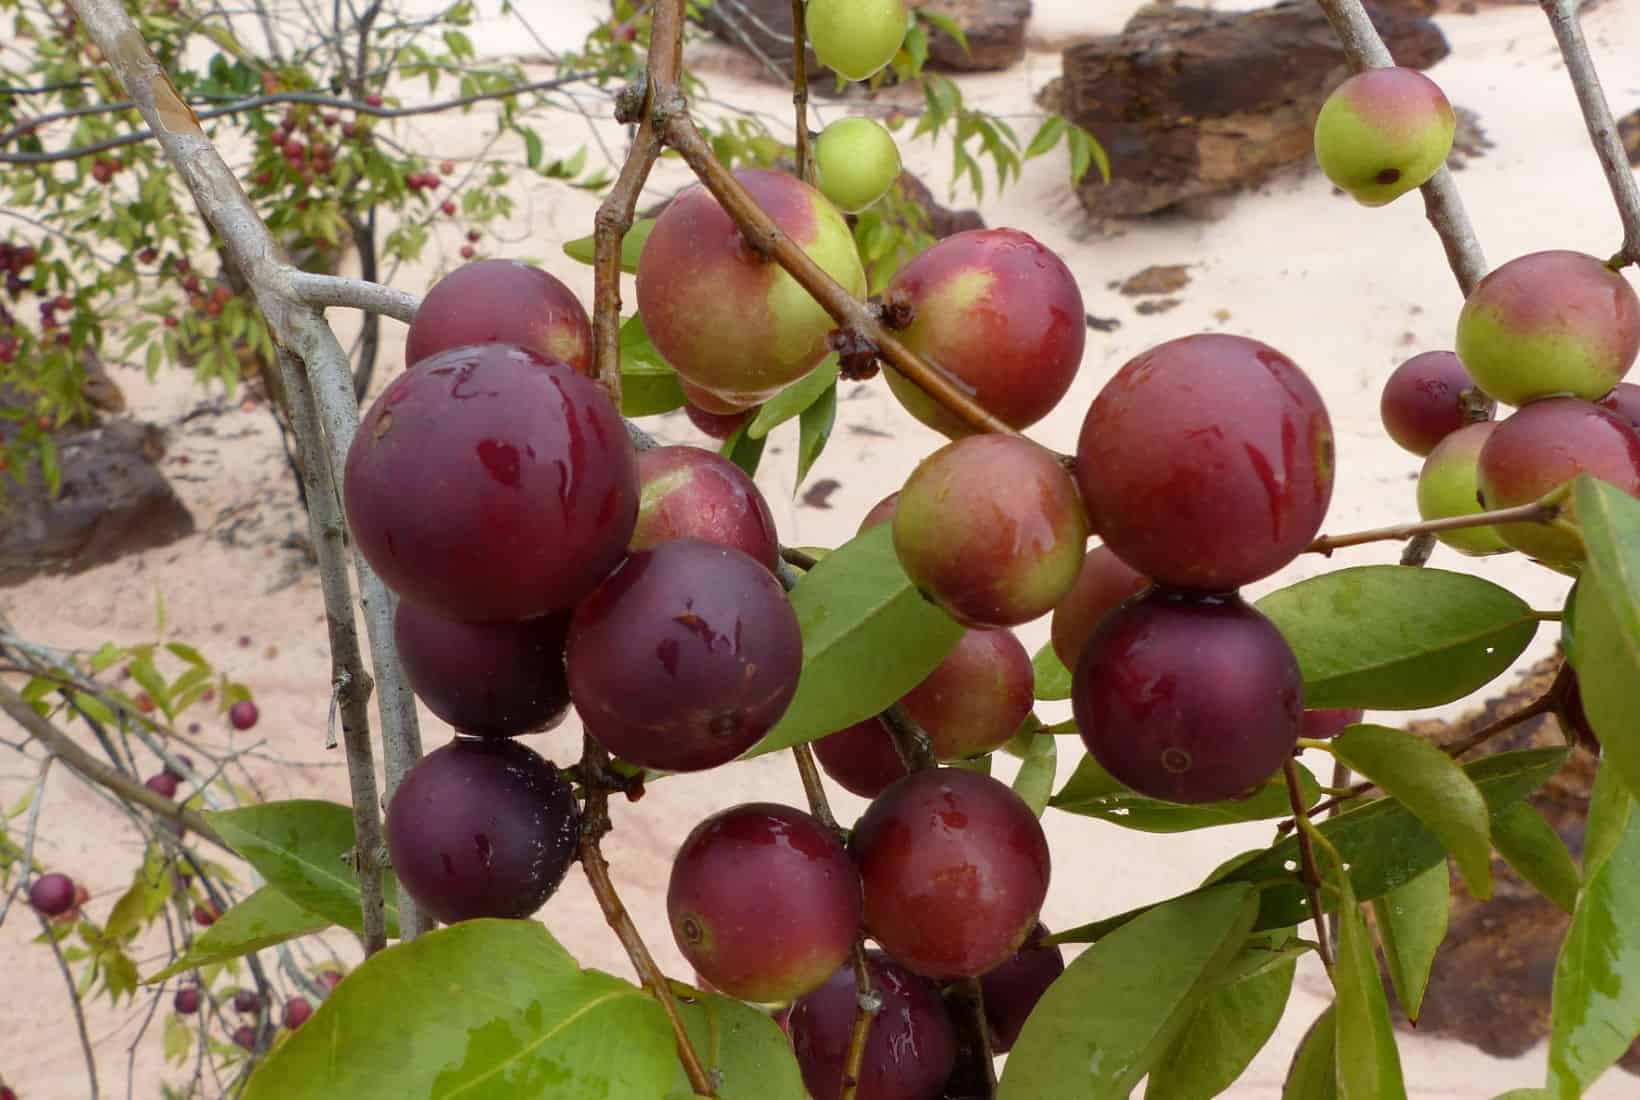 A bunch of fruits, specifically Camu Camu, hanging from a tree.